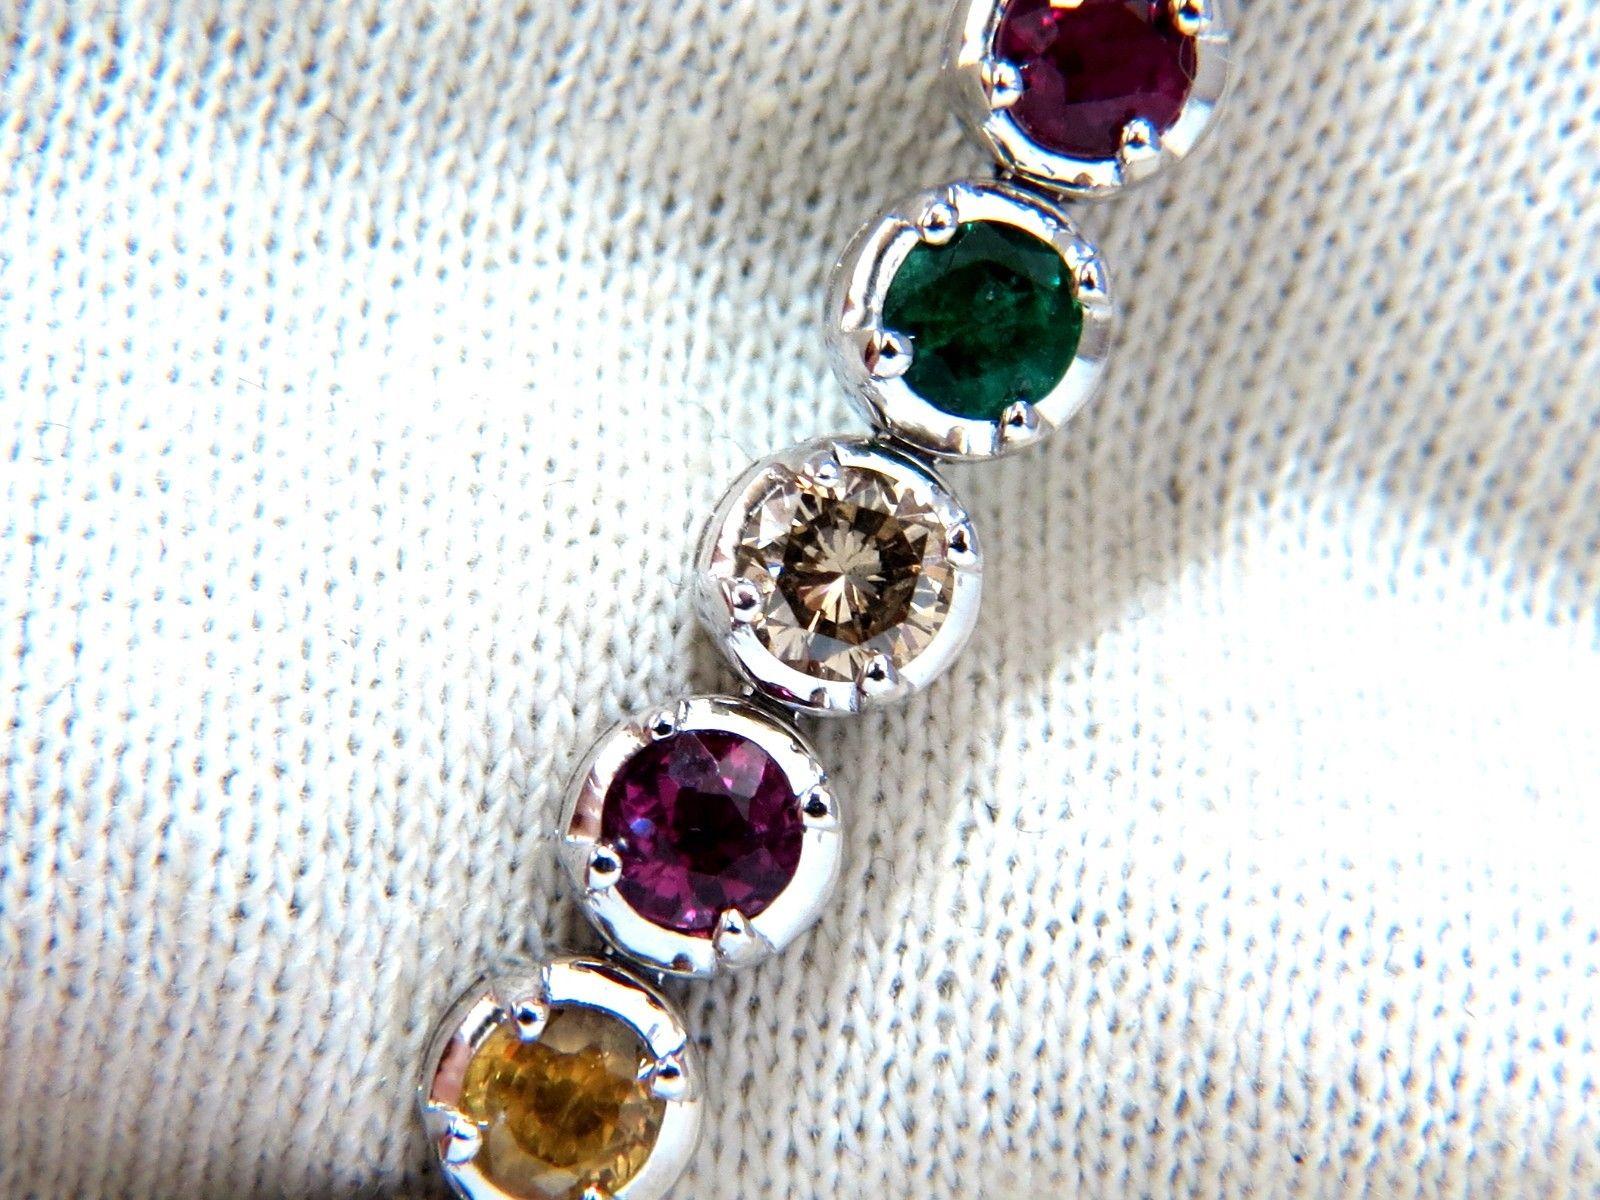 Gem Line.

10.30ct. Natural Sapphires, Ruby, & Emeralds bracelet.

Full round cuts, great sparkle.

Multicolor sapphires.

Vibrant Greens, yellows, Blues & Pinks

Clean Clarity & Transparent.

4 Round Diamonds: 1.30ct

Secure pressure clasp and